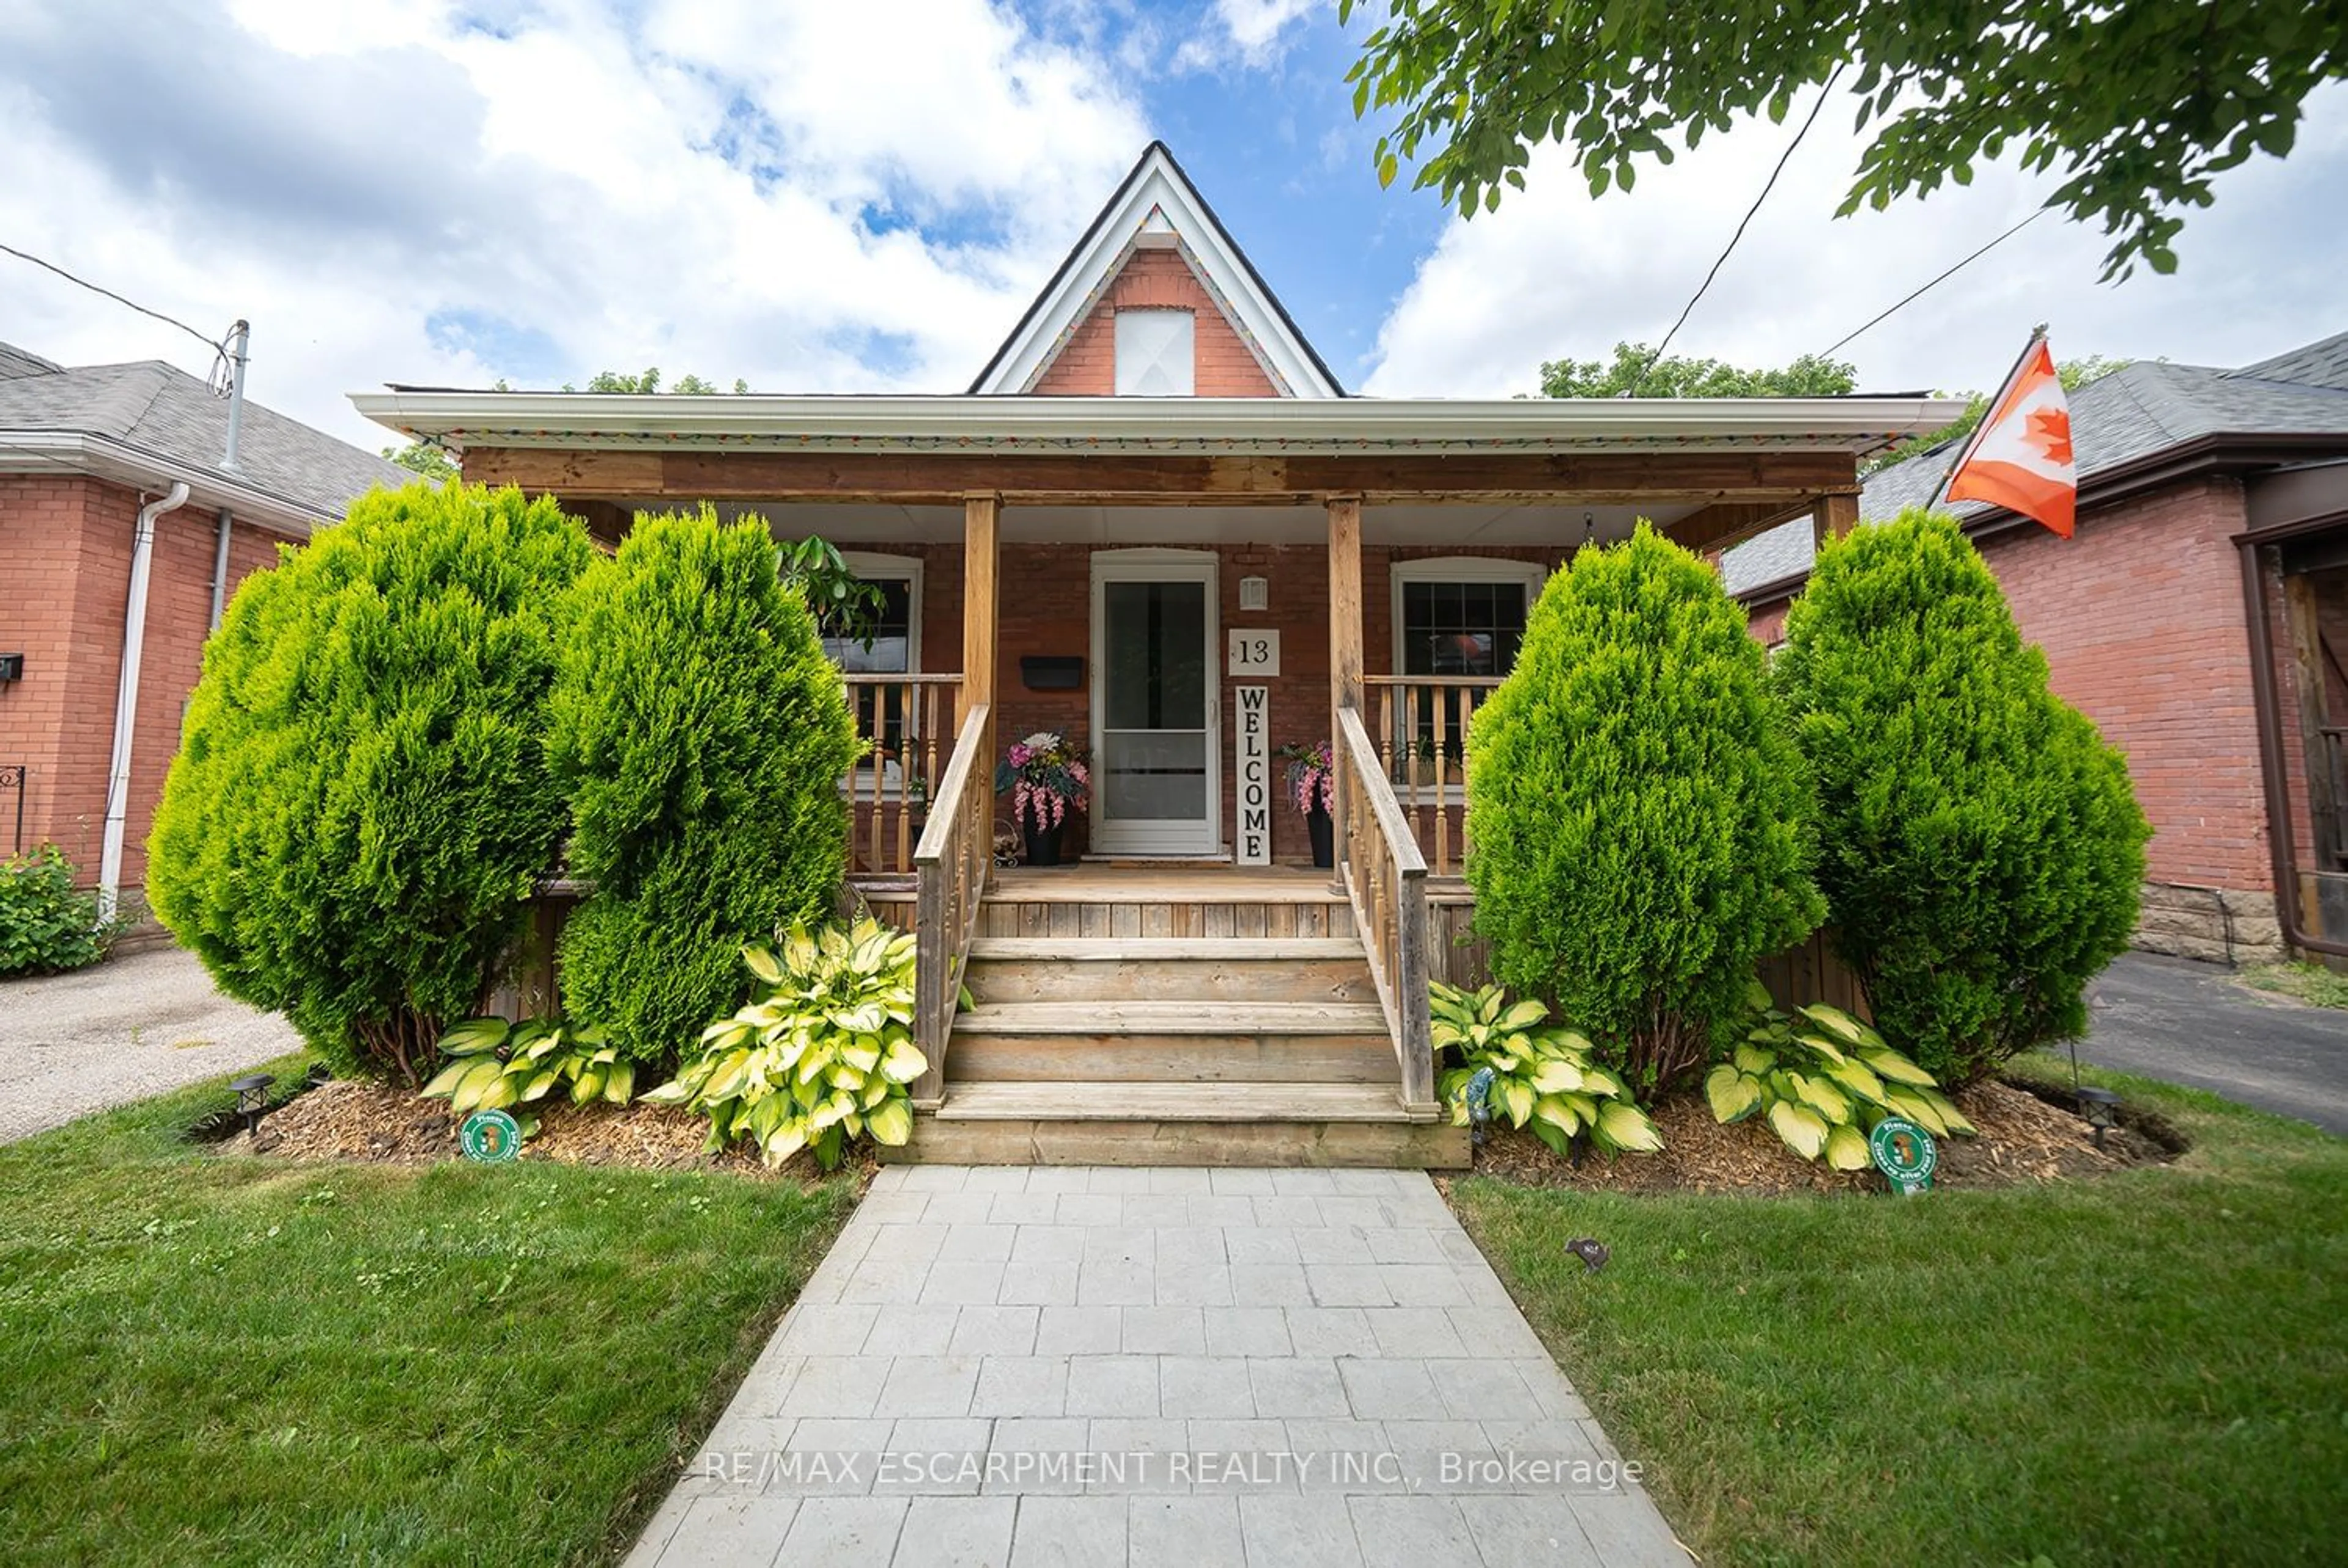 Outside view for 13 Strathcona Ave, Brantford Ontario N3S 1T4